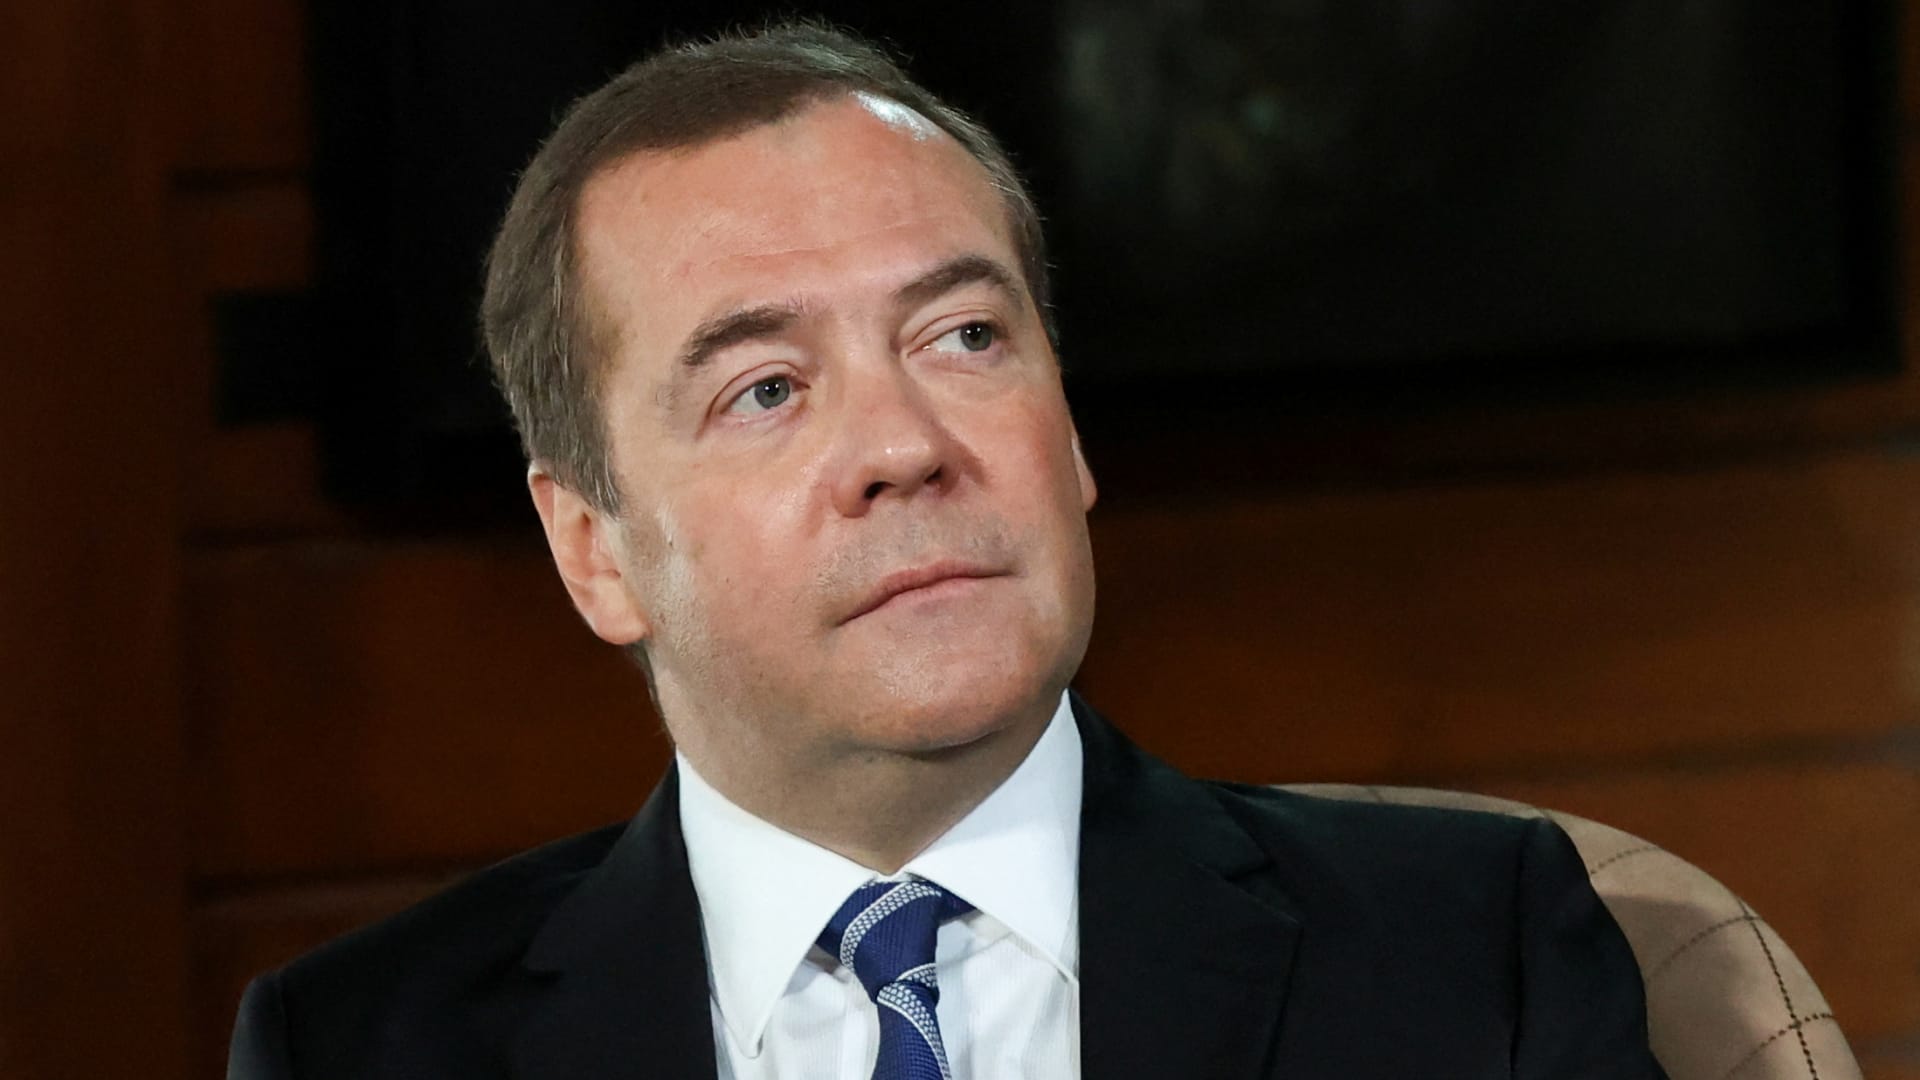 Deputy Chairman of Russia's Security Council Dmitry Medvedev gives an interview at the Gorki state residence outside Moscow, Russia January 25, 2022.